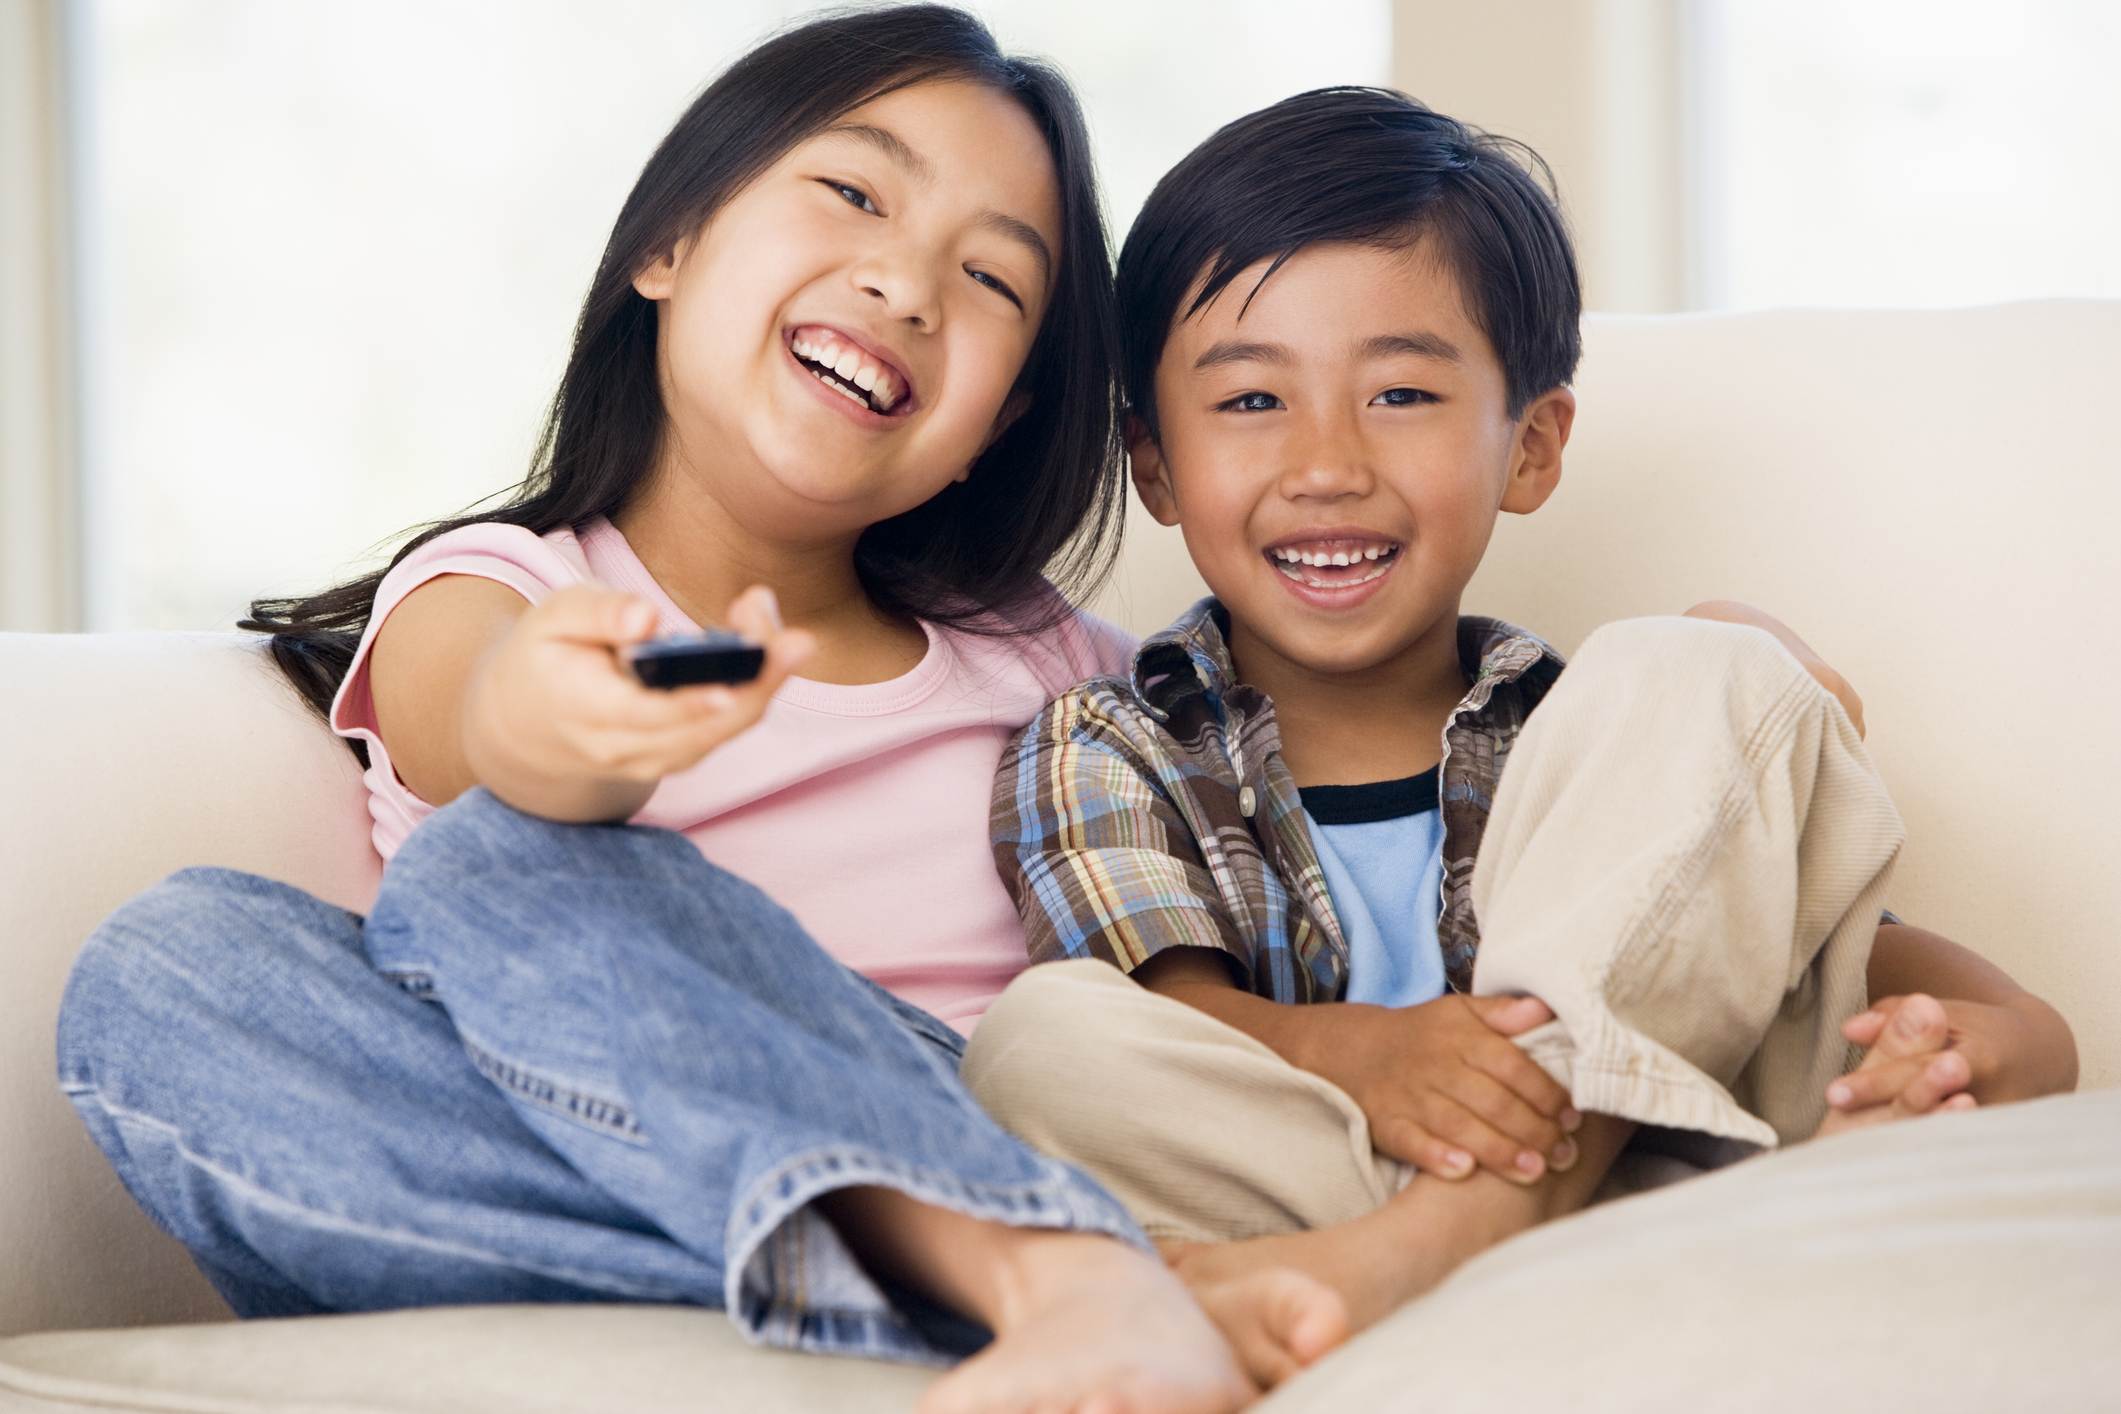 A girl and boy sat on couch happily watching TV